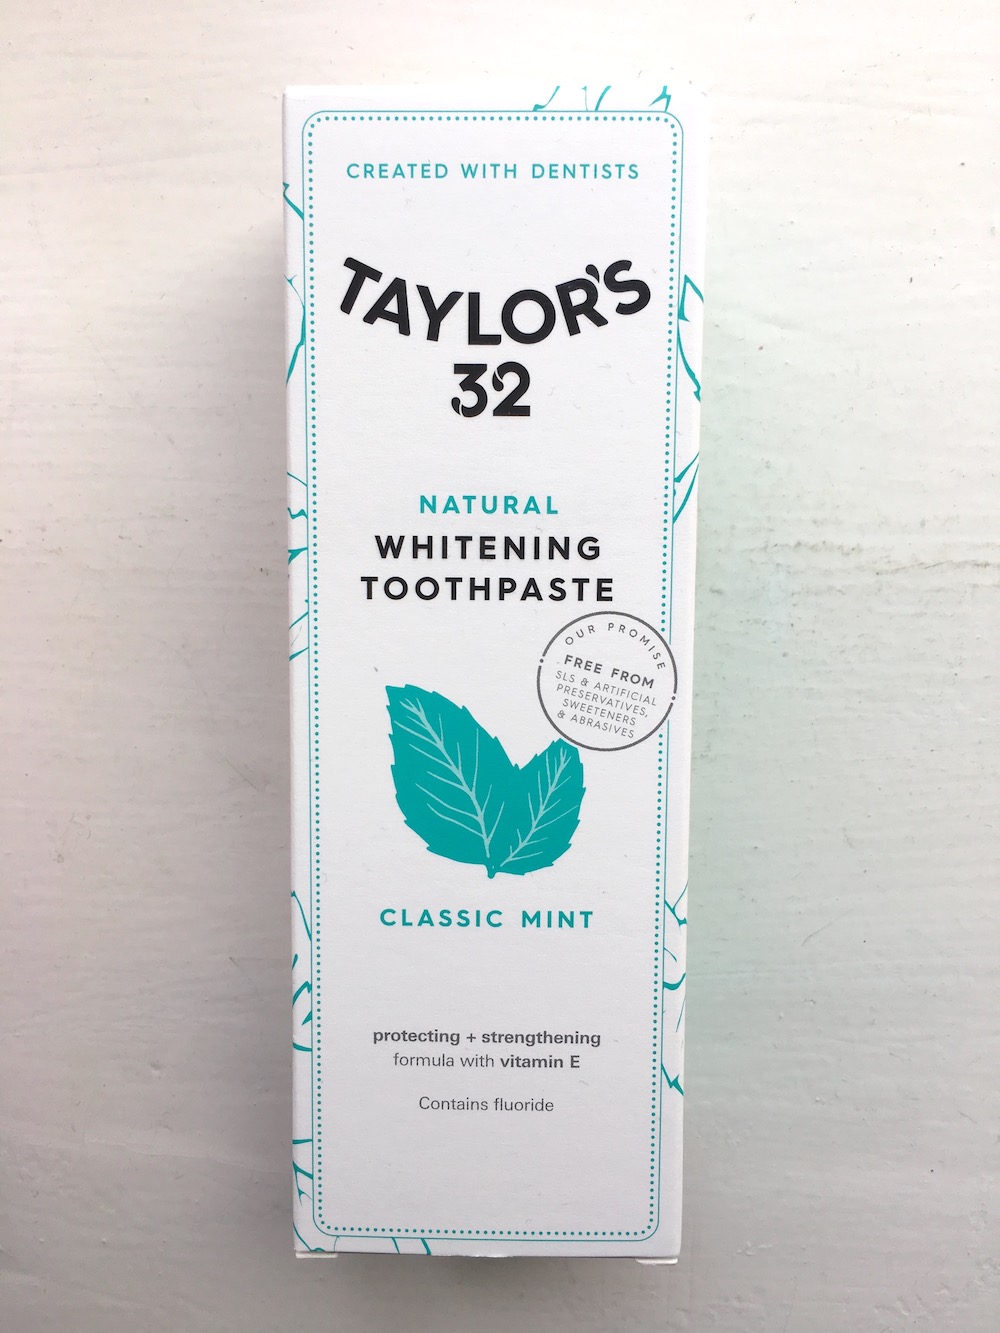 Taylors 32 toothpaste classic mint